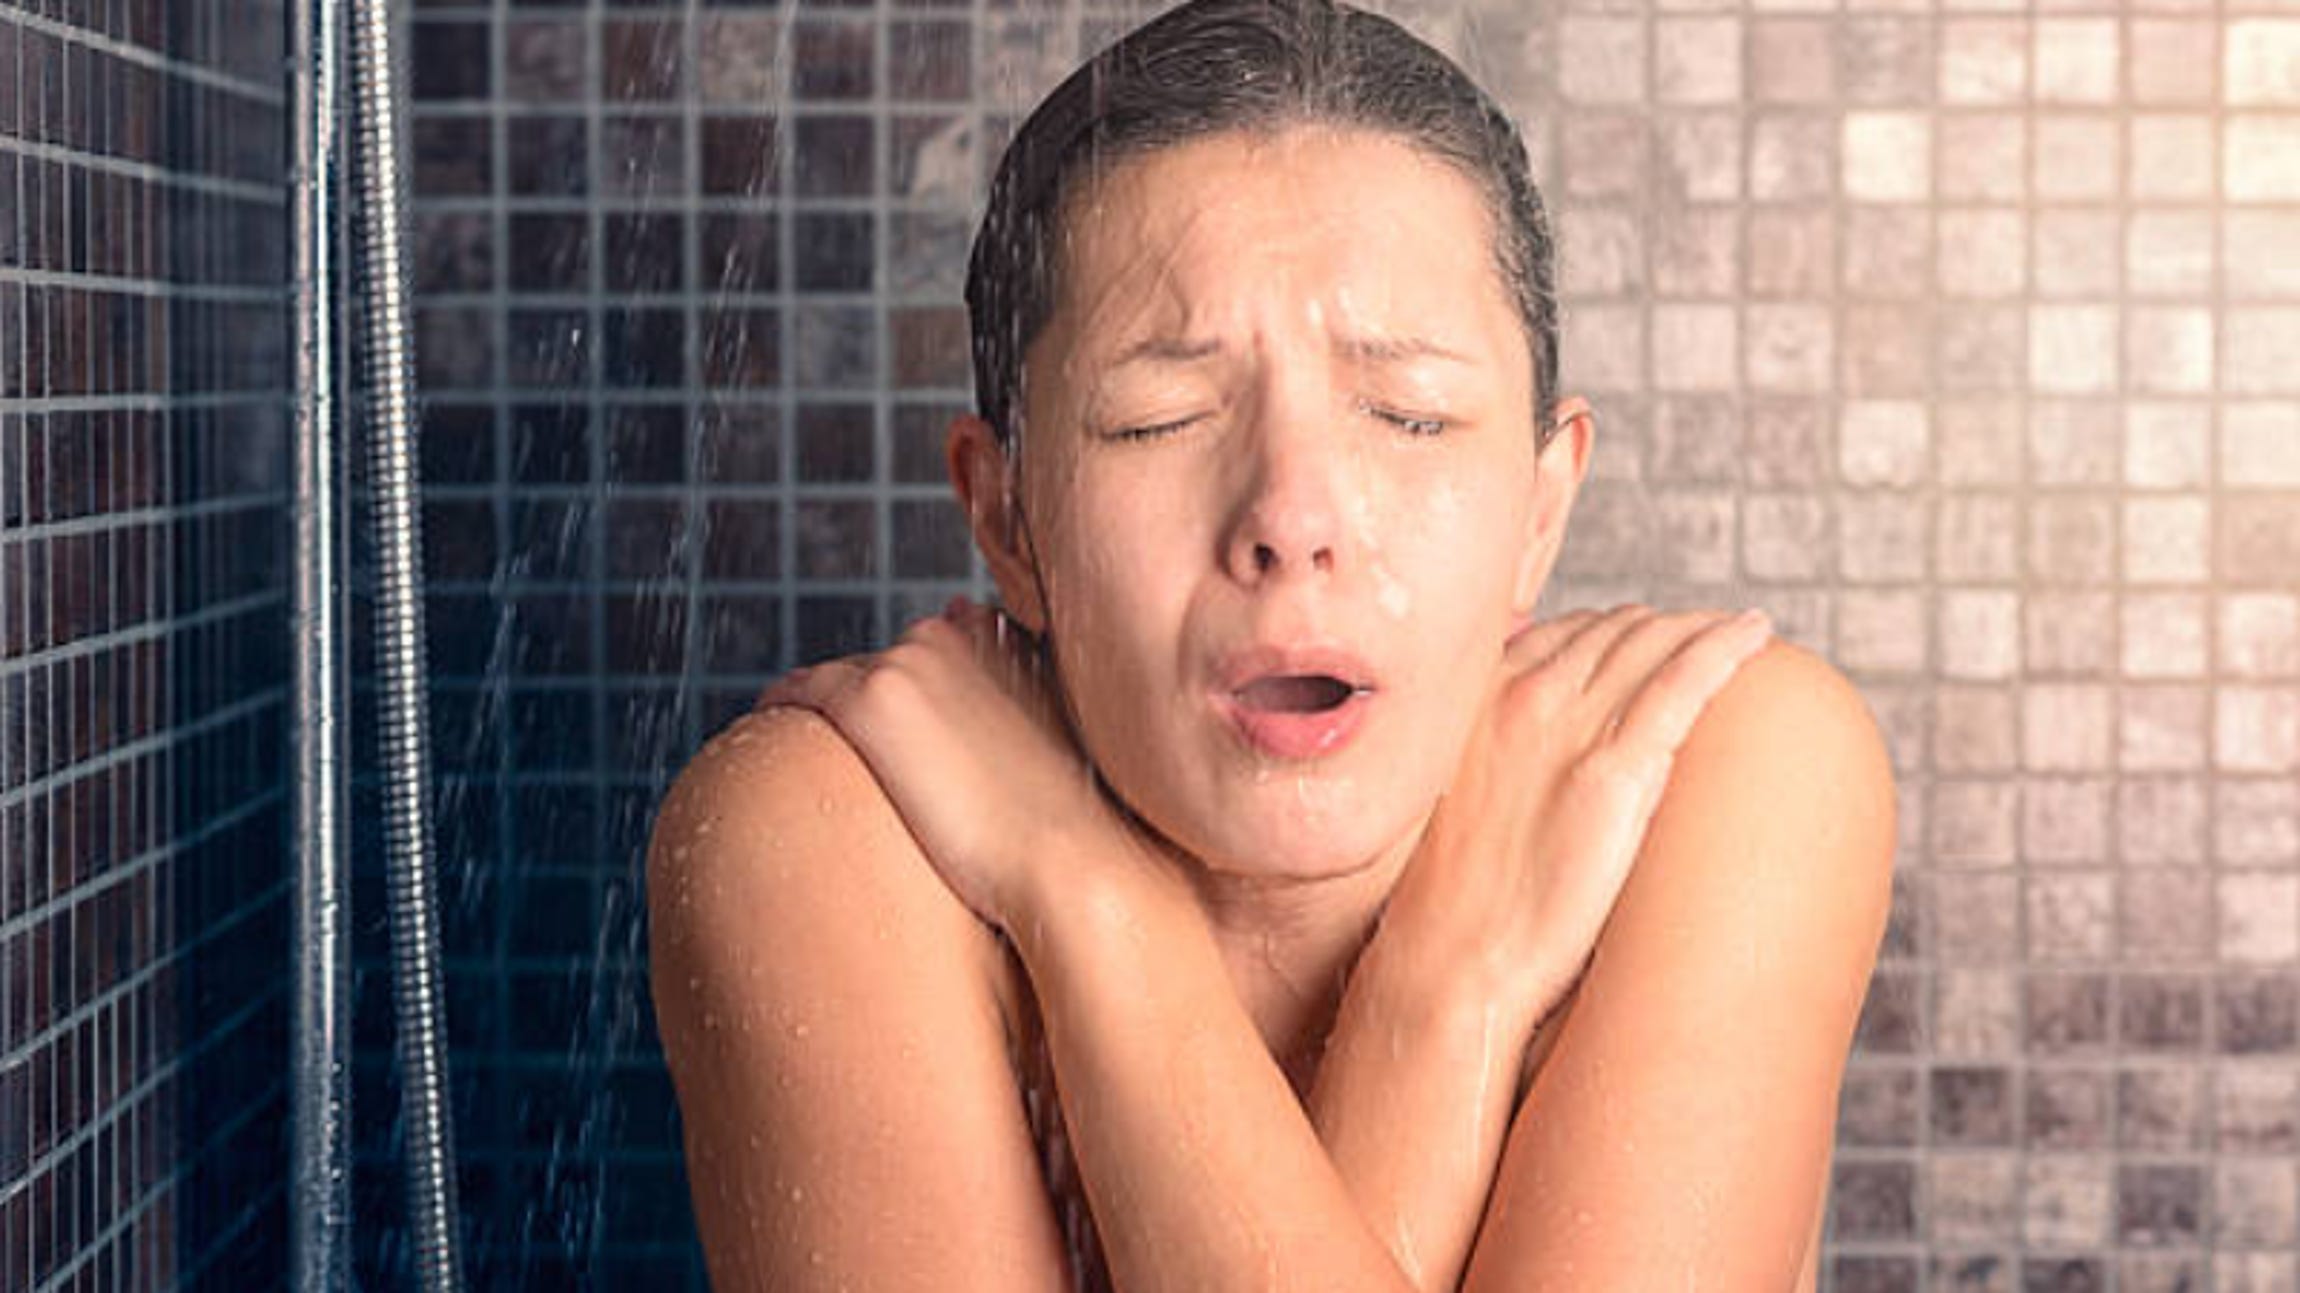 woman having a cold shower and struggling